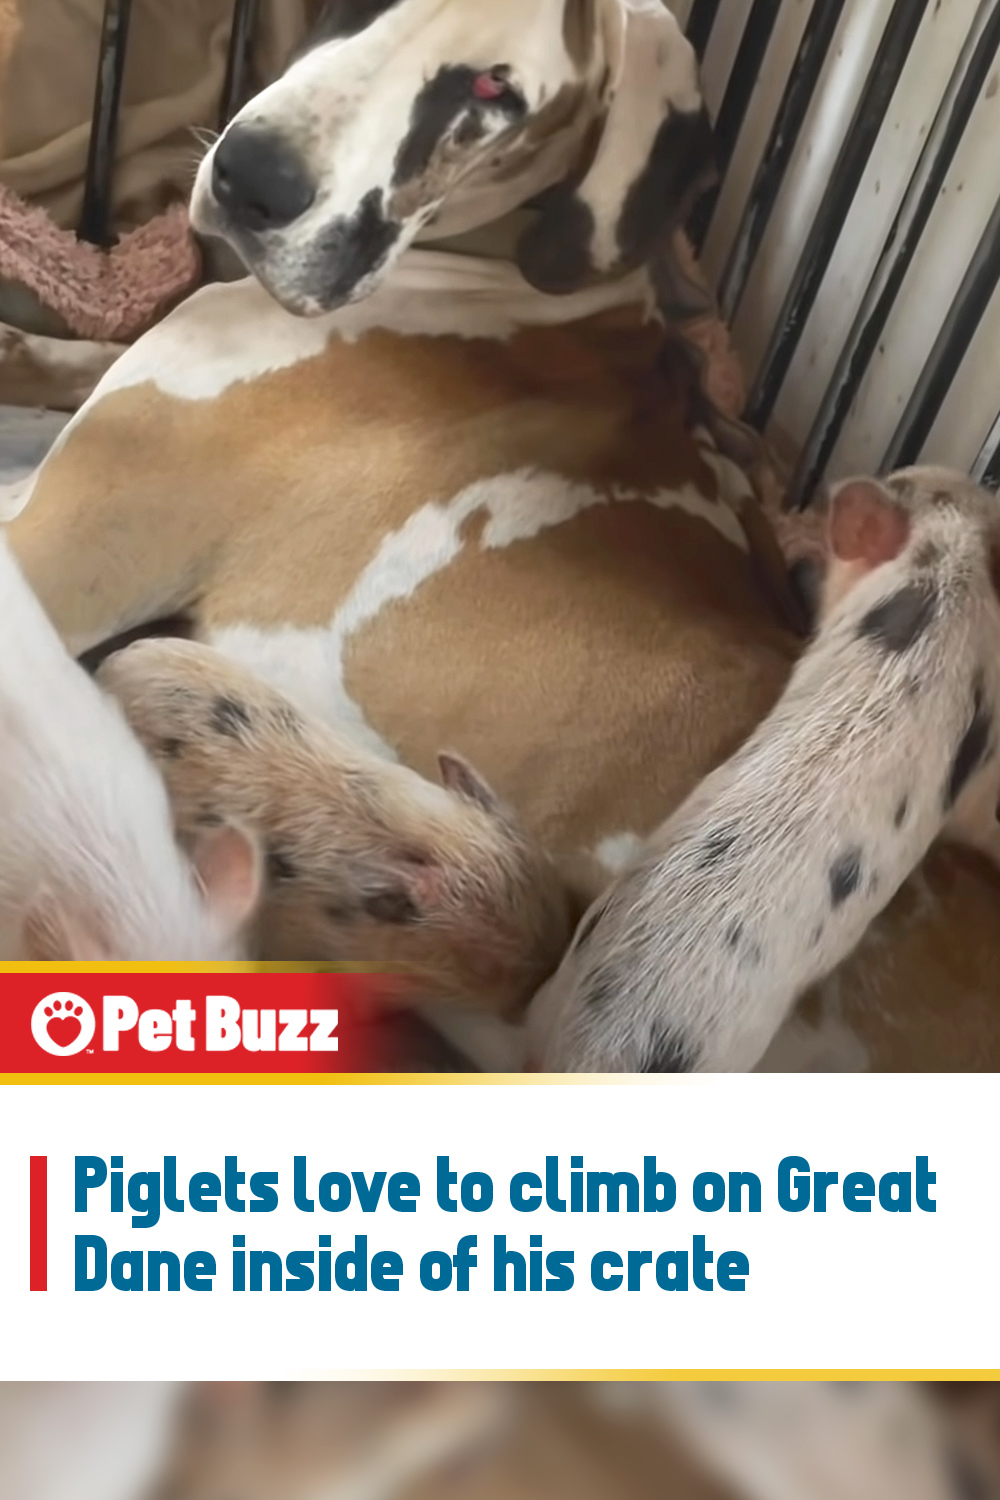 Piglets love to climb on Great Dane inside of his crate